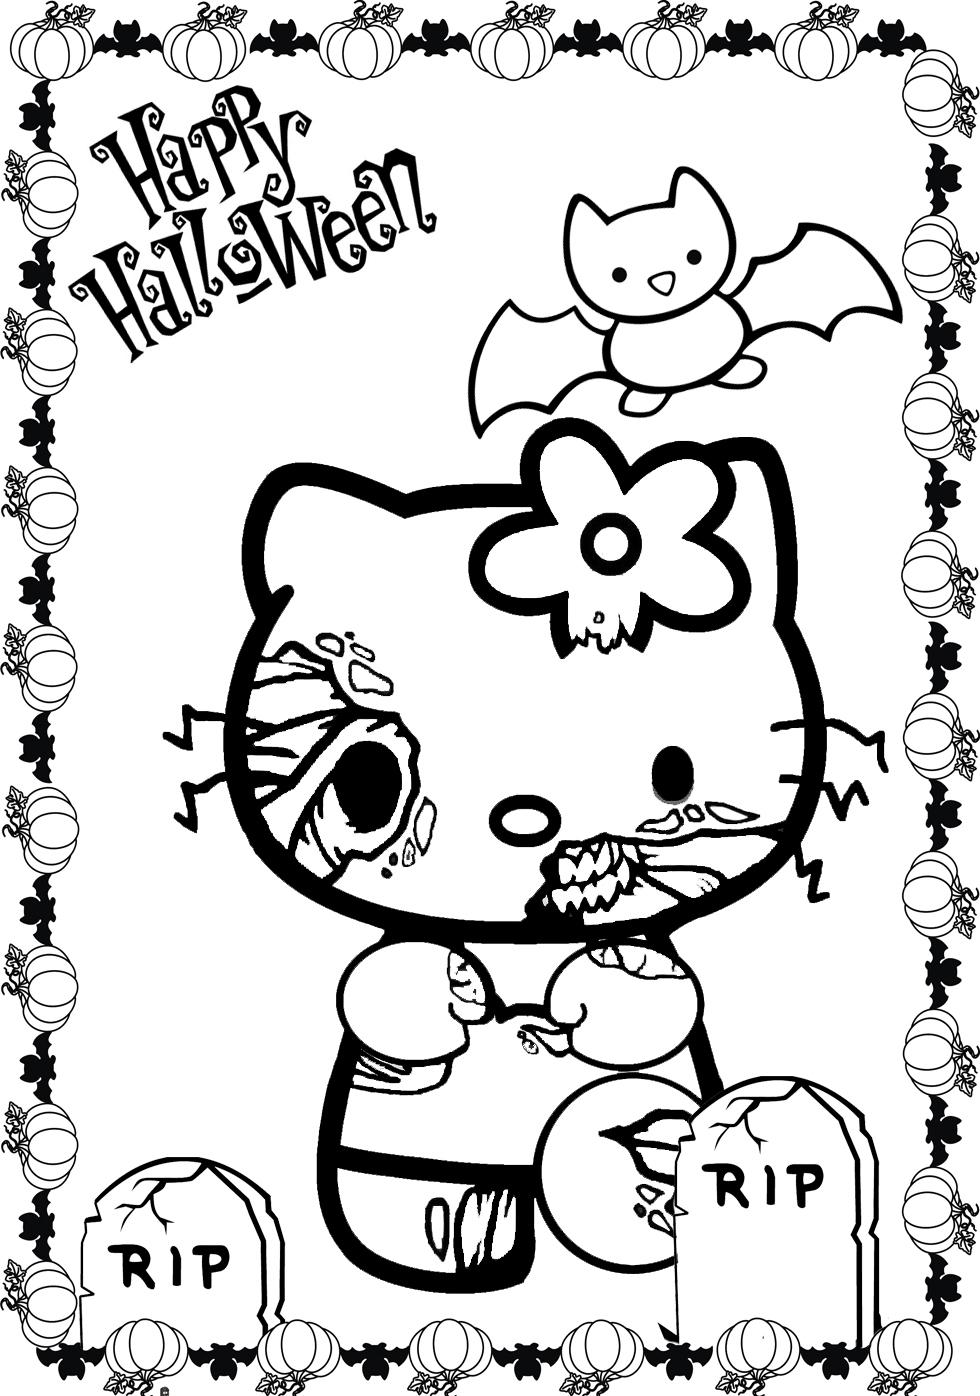 Hello Kitty Halloween Coloring Pages - Best Coloring Pages For Kids